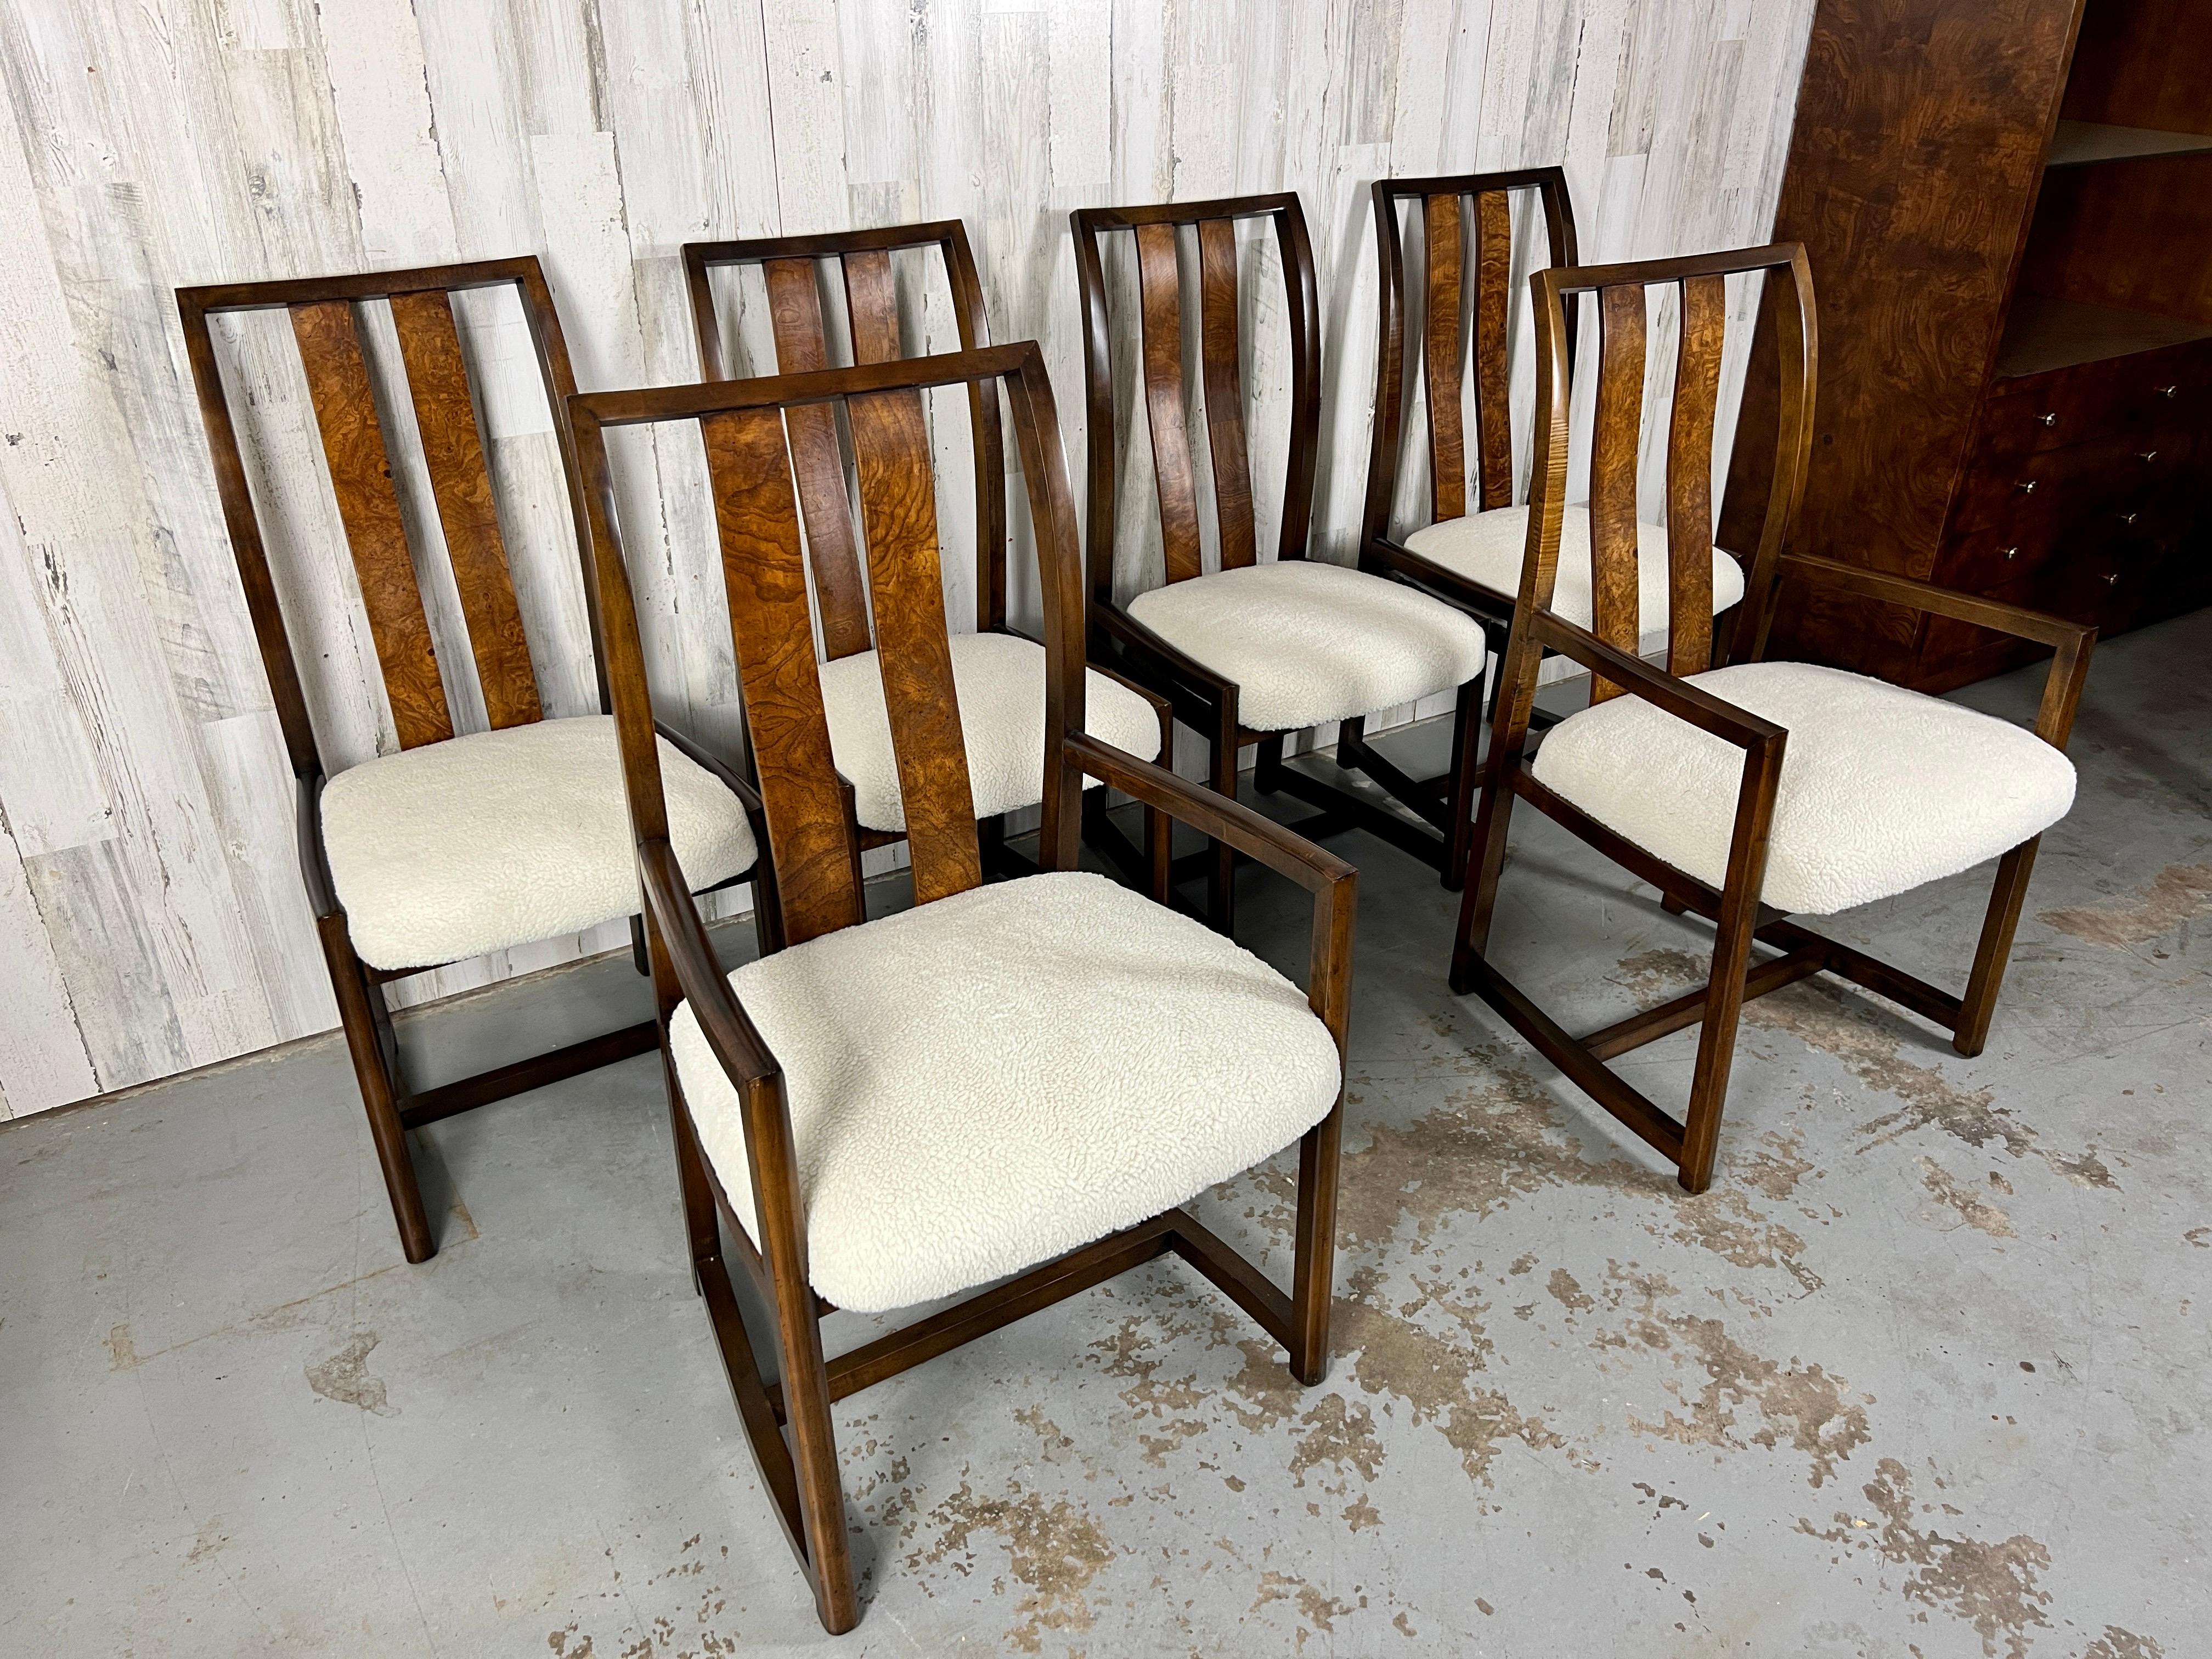 Very comfortable set of six dining chairs with two arm chairs and four side chairs. Very curvy lines and burl wood panels on the front and back. New Sherpa faux fur seat covers.

Non arm chairs measurements: 23.25 D x 19.50 W x 39.38 H x 19 seat